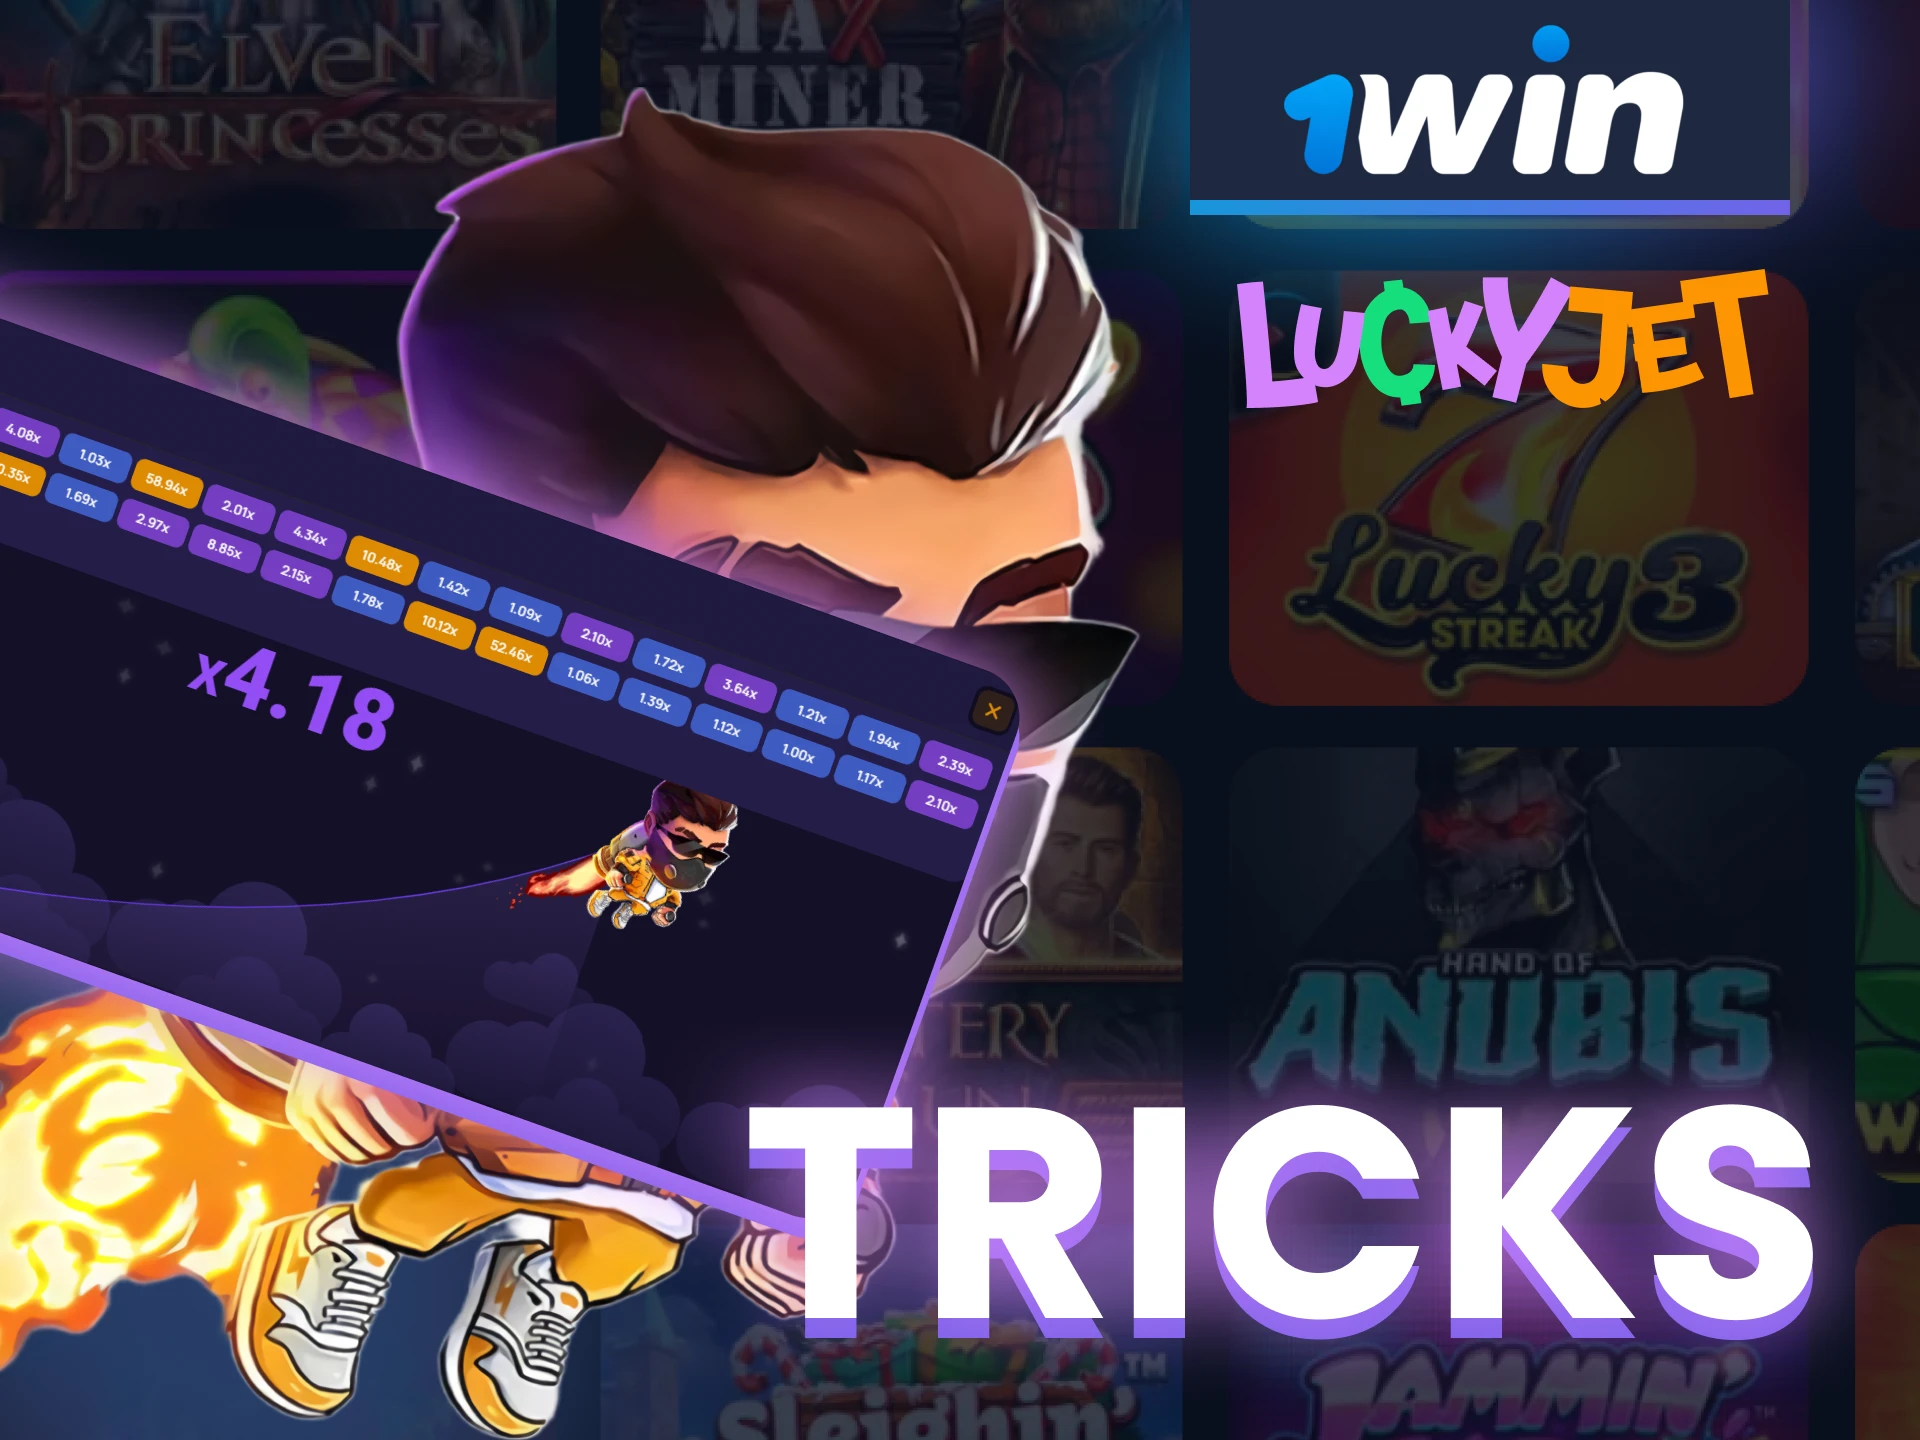 Learn about tricks for Lucky Jet on 1win.